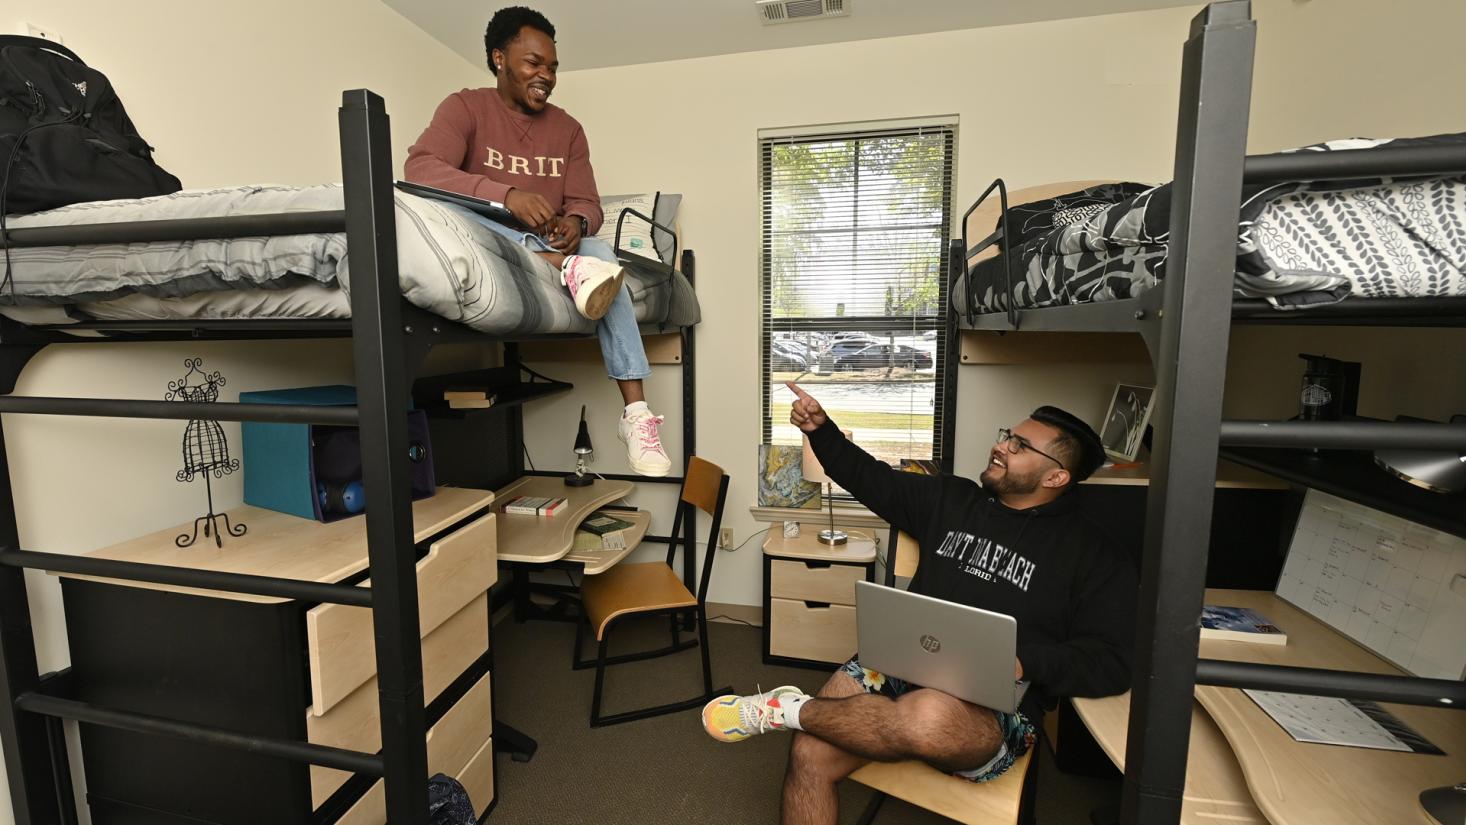 Two students in student housing room